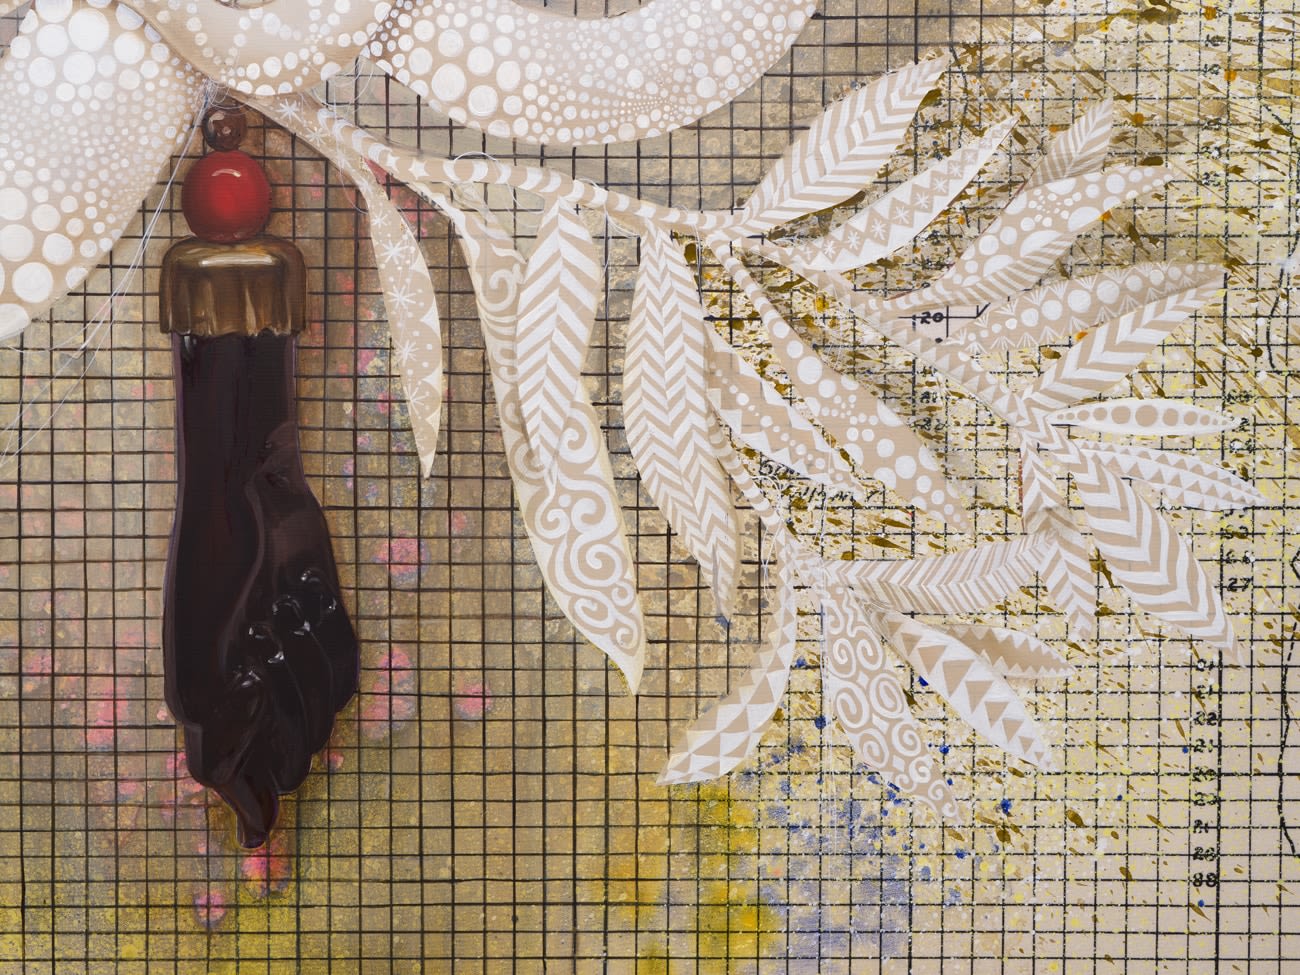 Detail of FIRELEI B&Aacute;EZ's Tignon for Ayda Weddo (or that which a center can not hold),&nbsp;2019